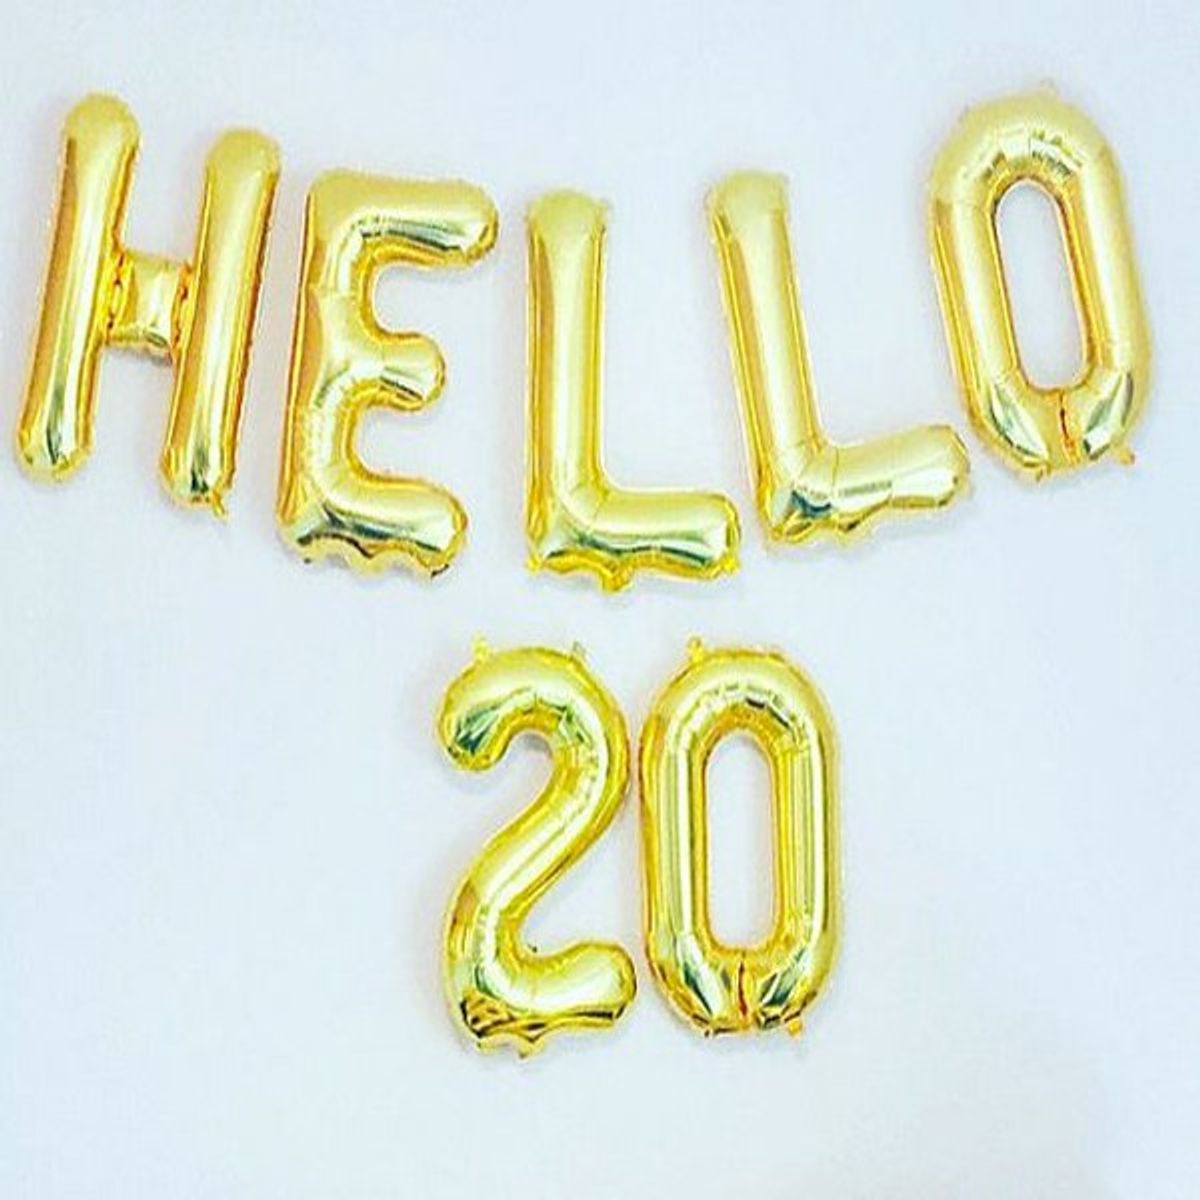 20 Things I've Learned Before Turning 20